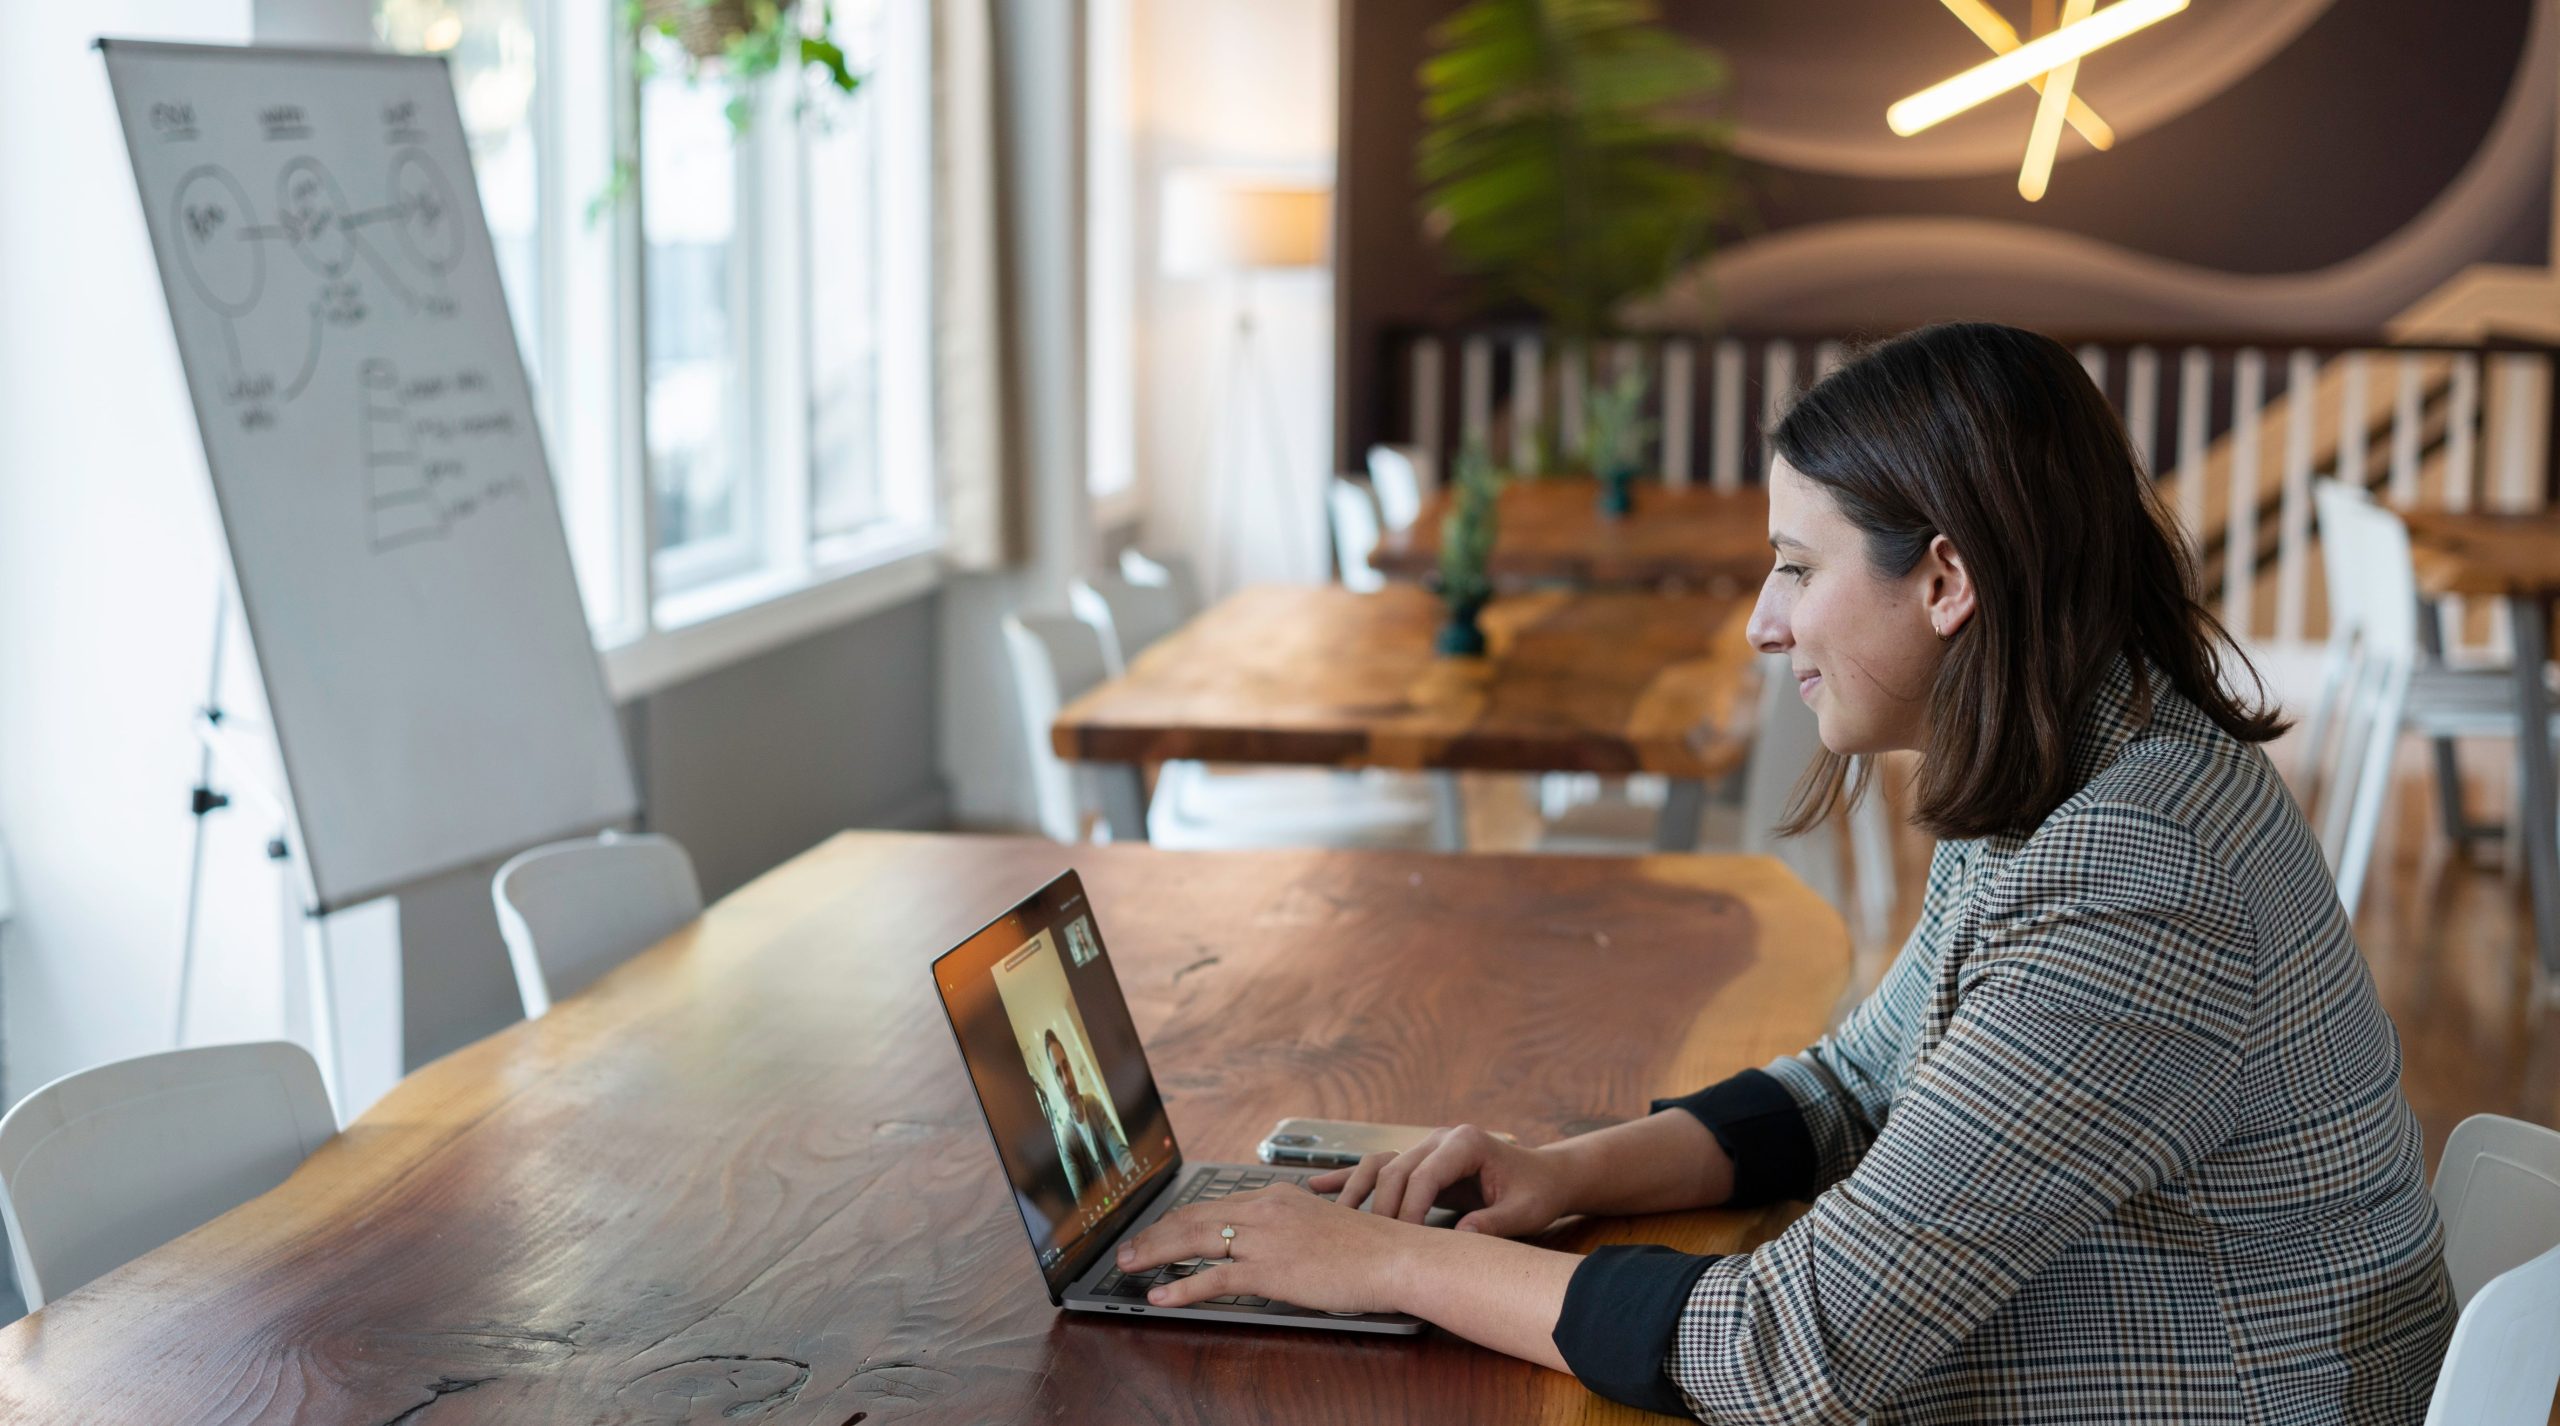 Woman sitting in front of a laptop in an office-like setting during a video call.